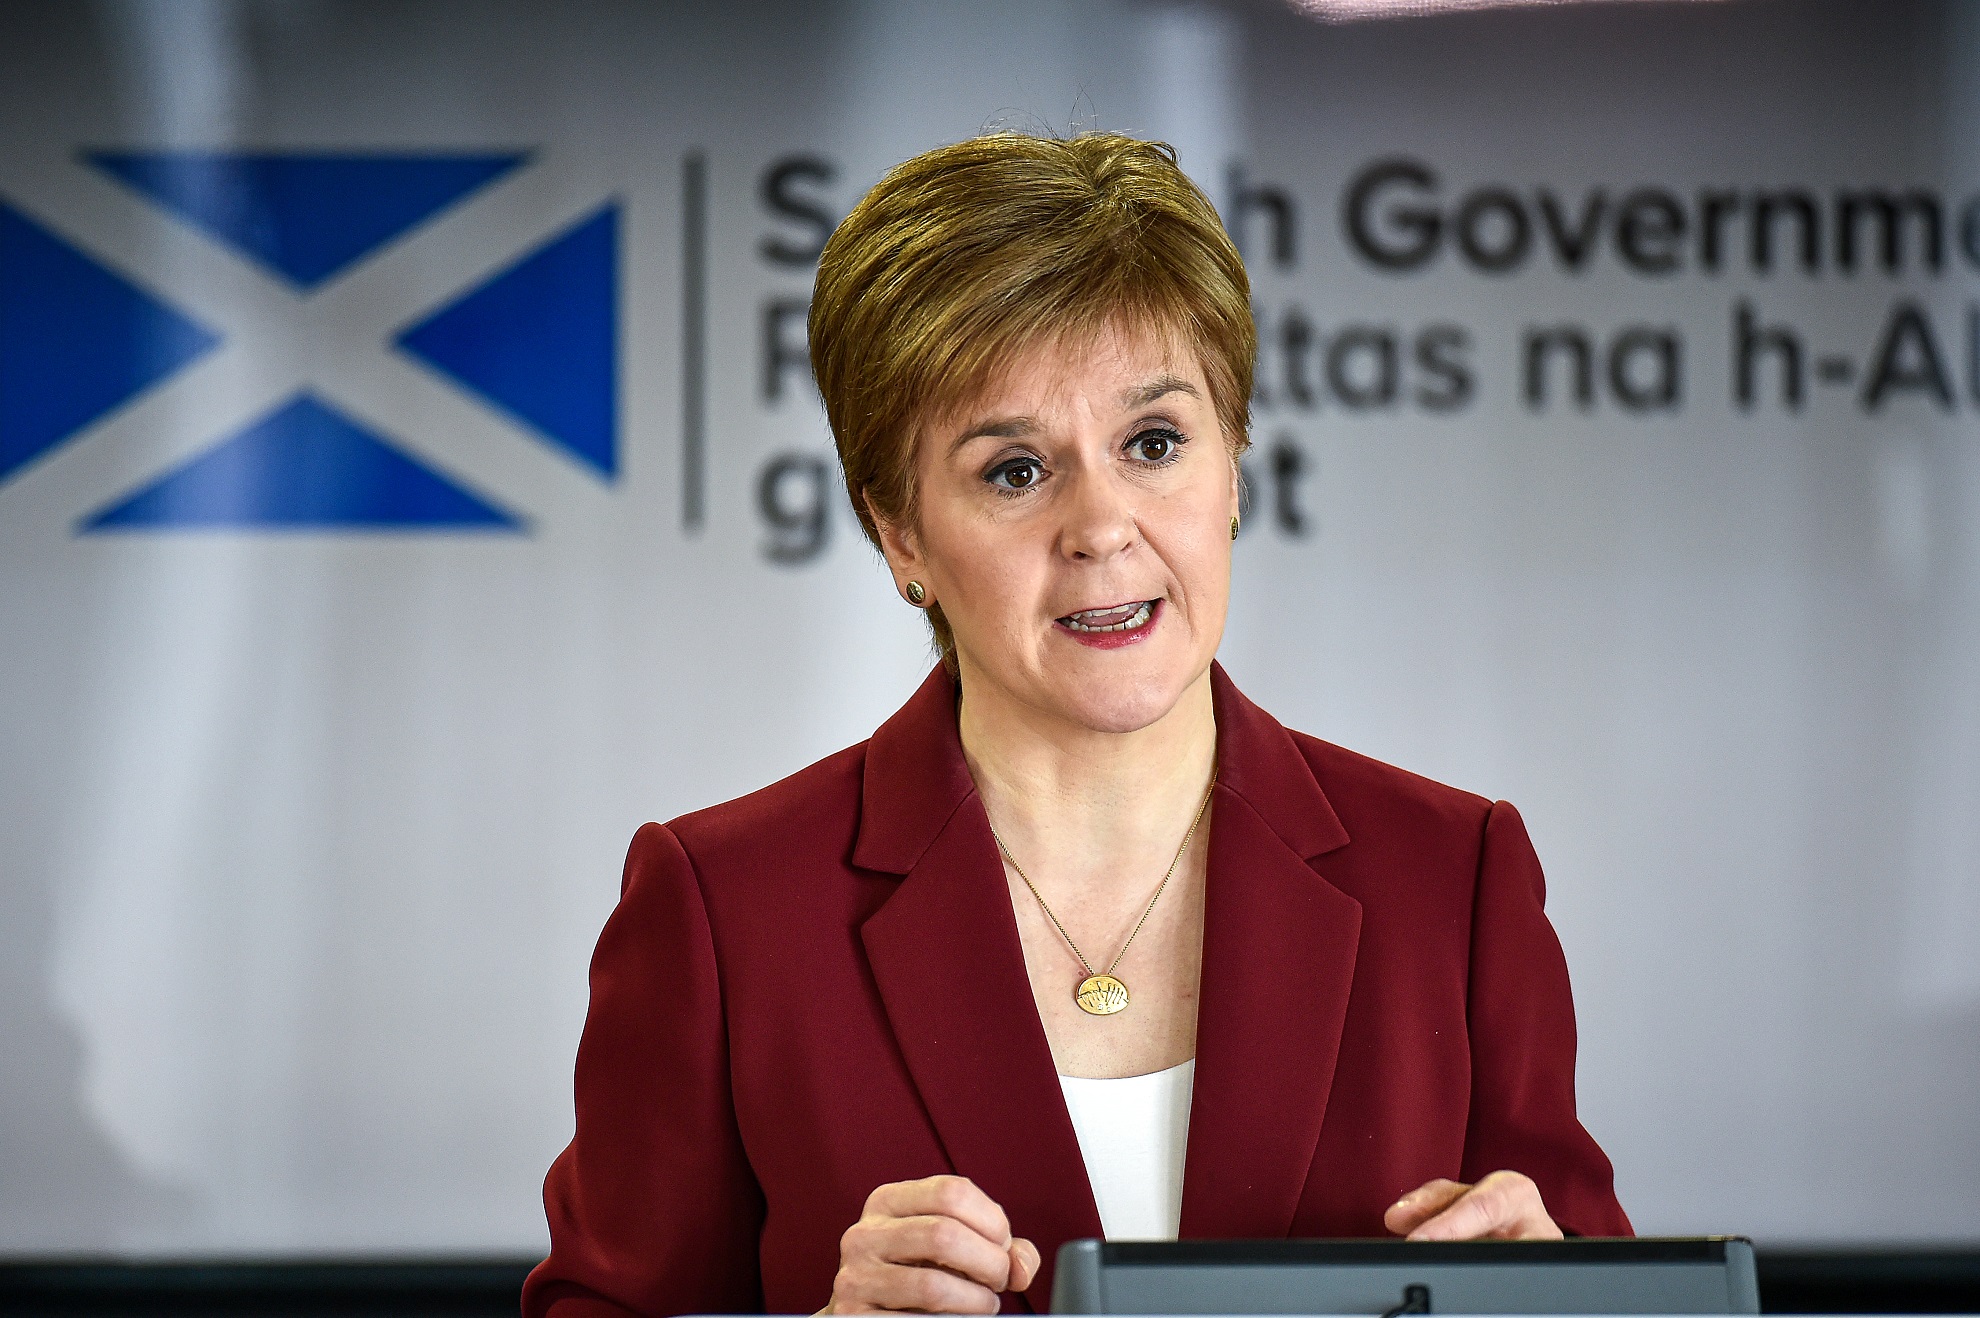  Sturgeon has called for a teenage orphan to be granted permission to stay in the UK.